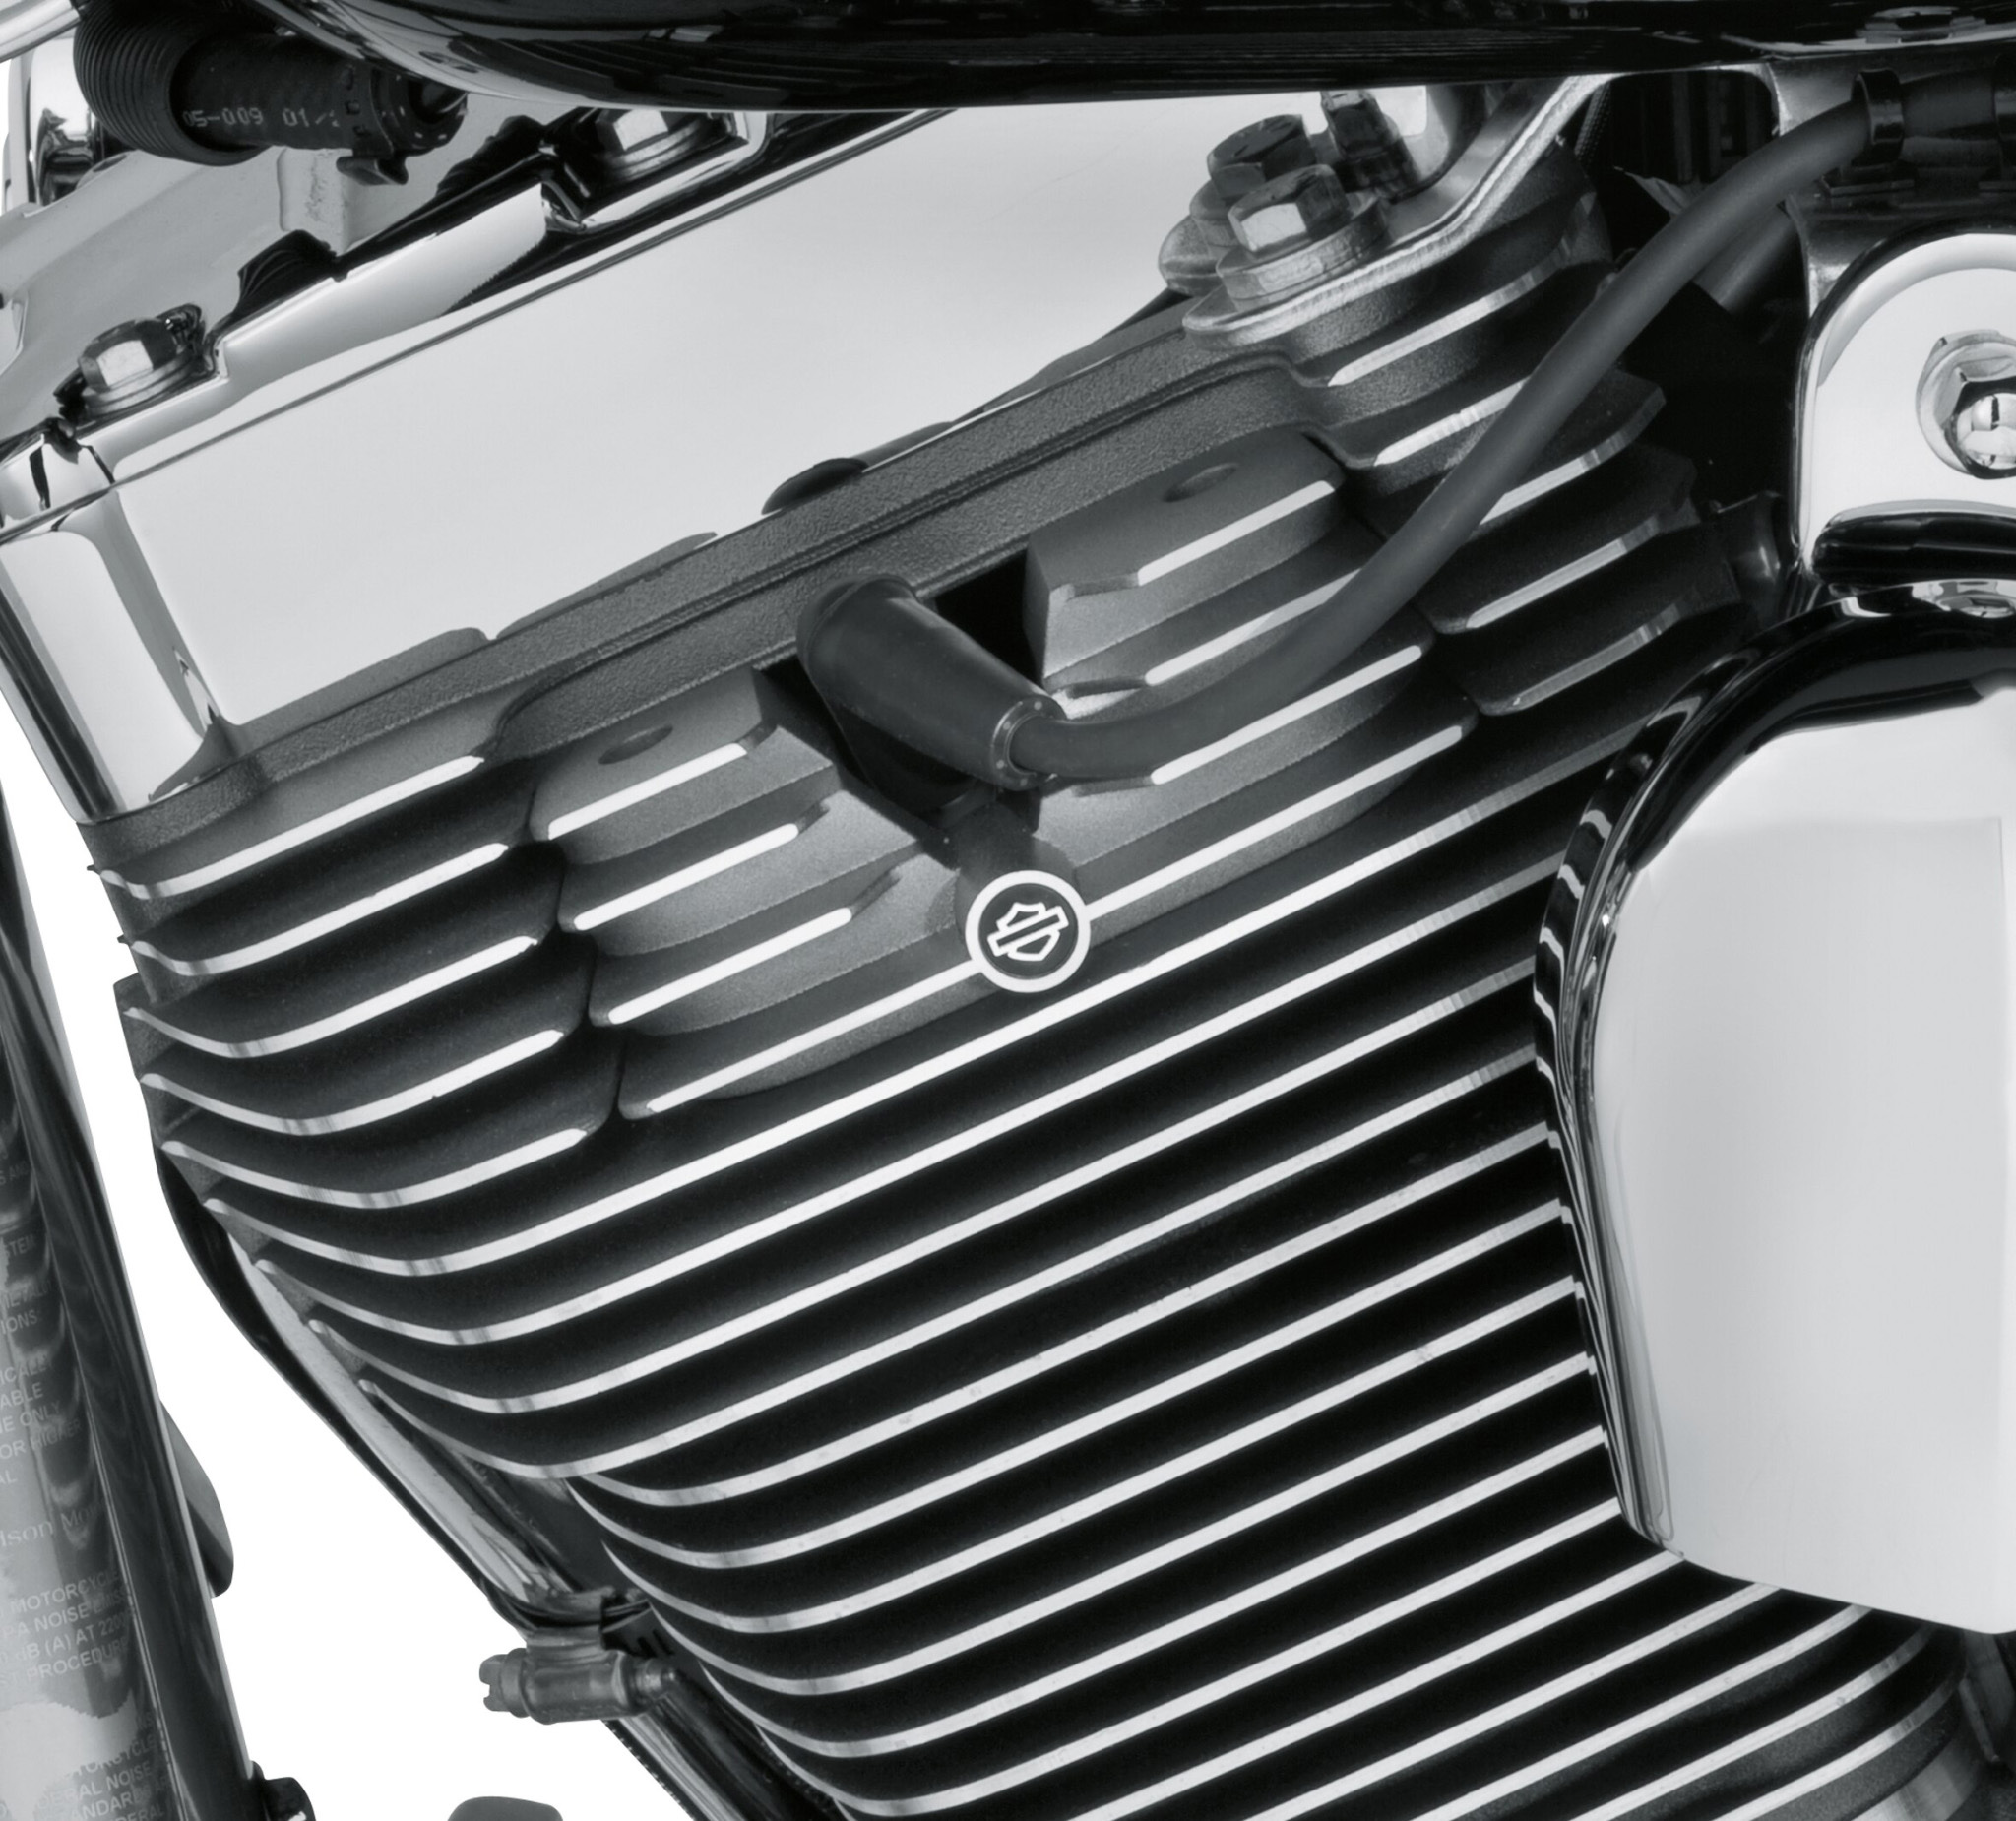 Details about   HARDDRIVE 2010-2016 Harley-Davidson XL1200X Forty-Eight FINNED HEADBOLT COVER SI